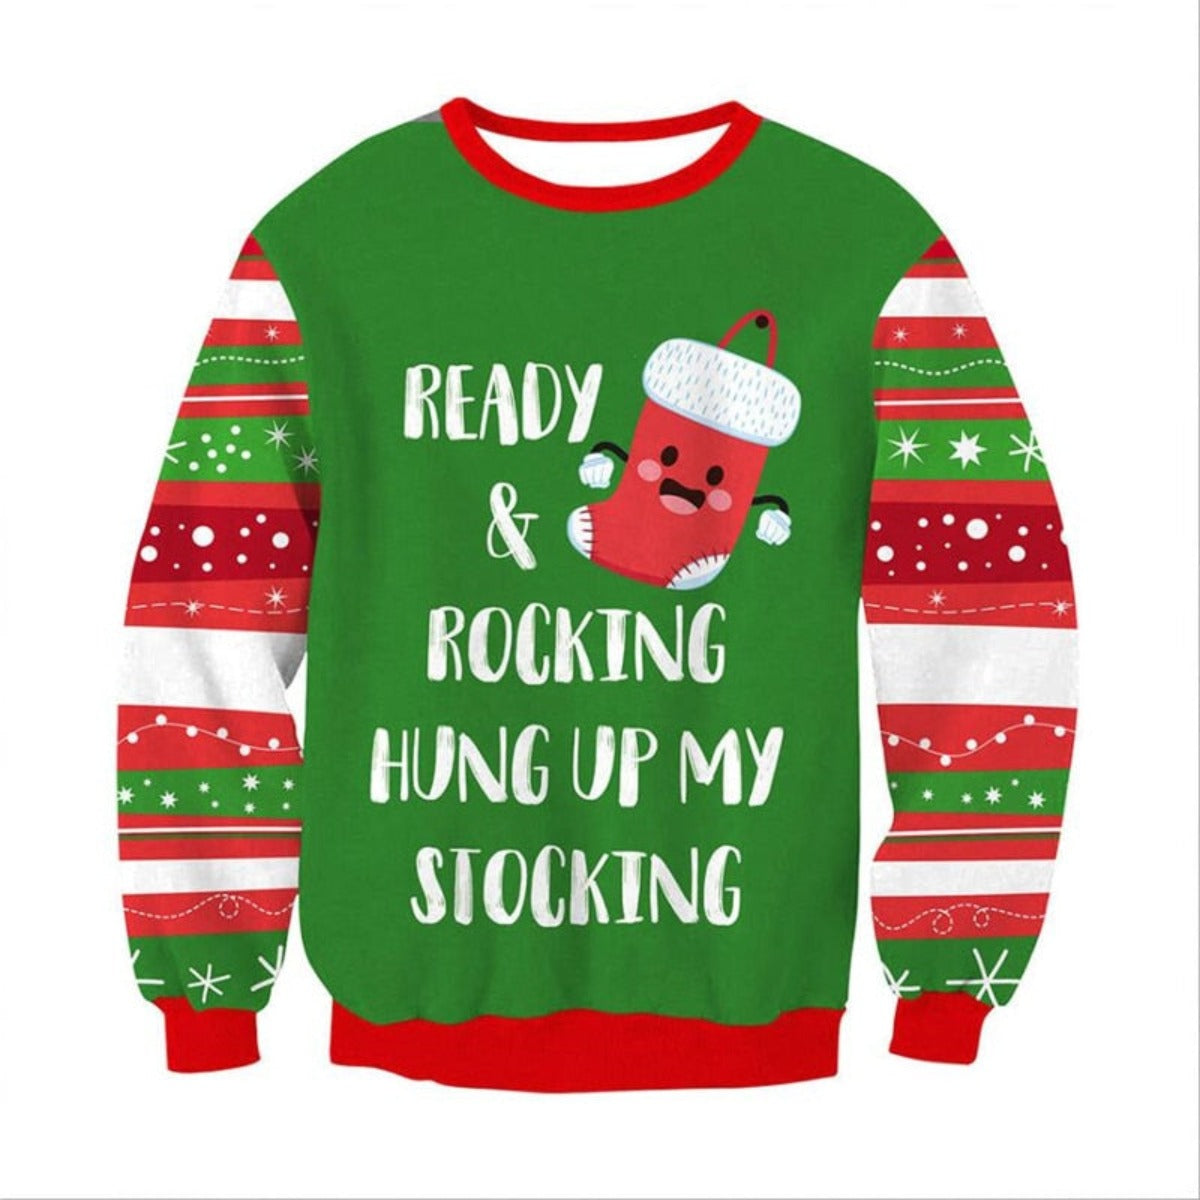 Ready & Rocking Hung Up My Stocking Ugly Christmas Sweater